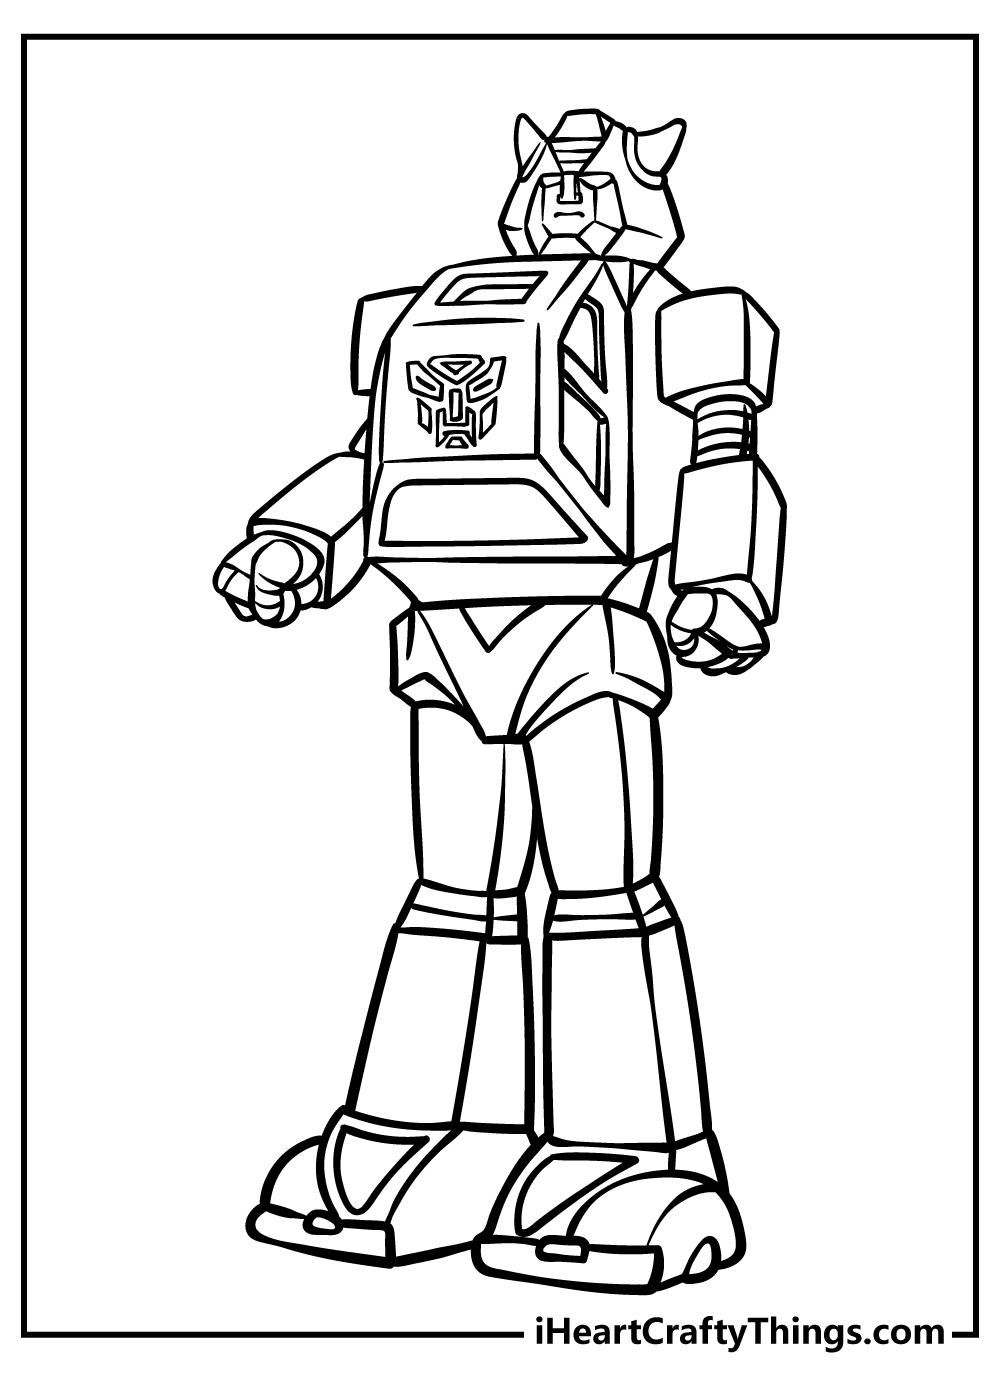 Printable Transformers Coloring Pages Updated 20